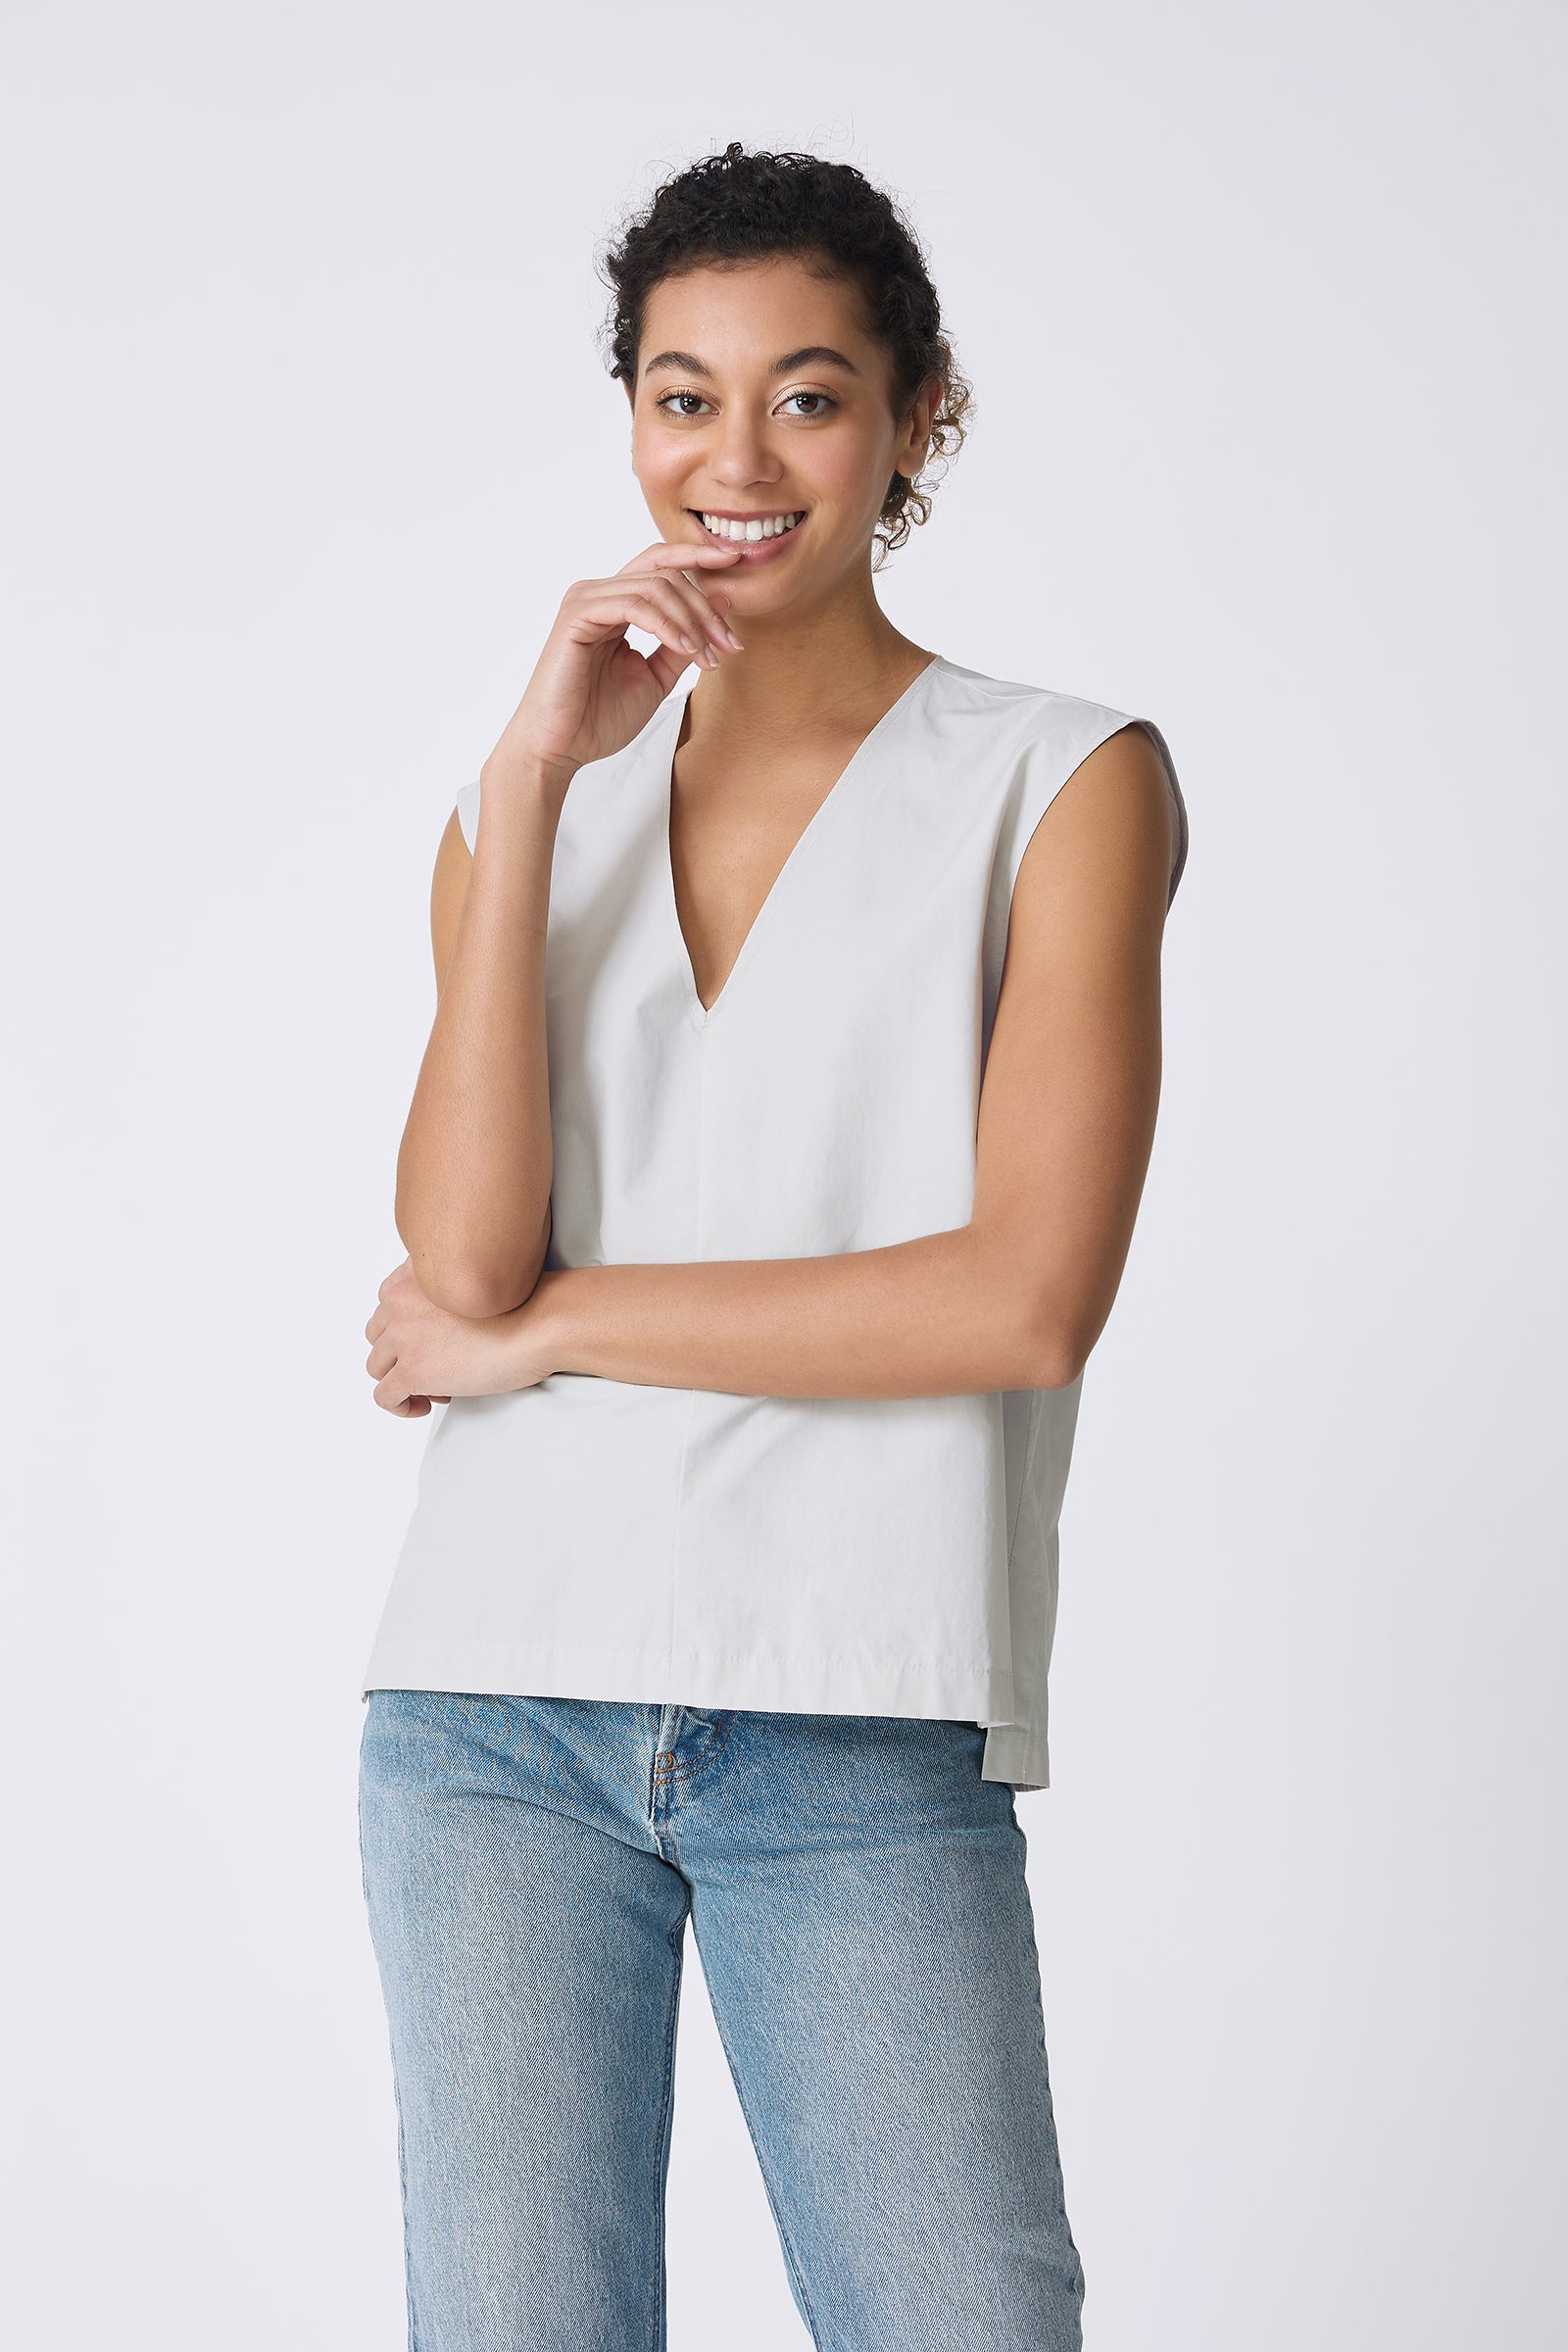 Kal Rieman Ava V-Neck Shell in Stone on model smiling front view